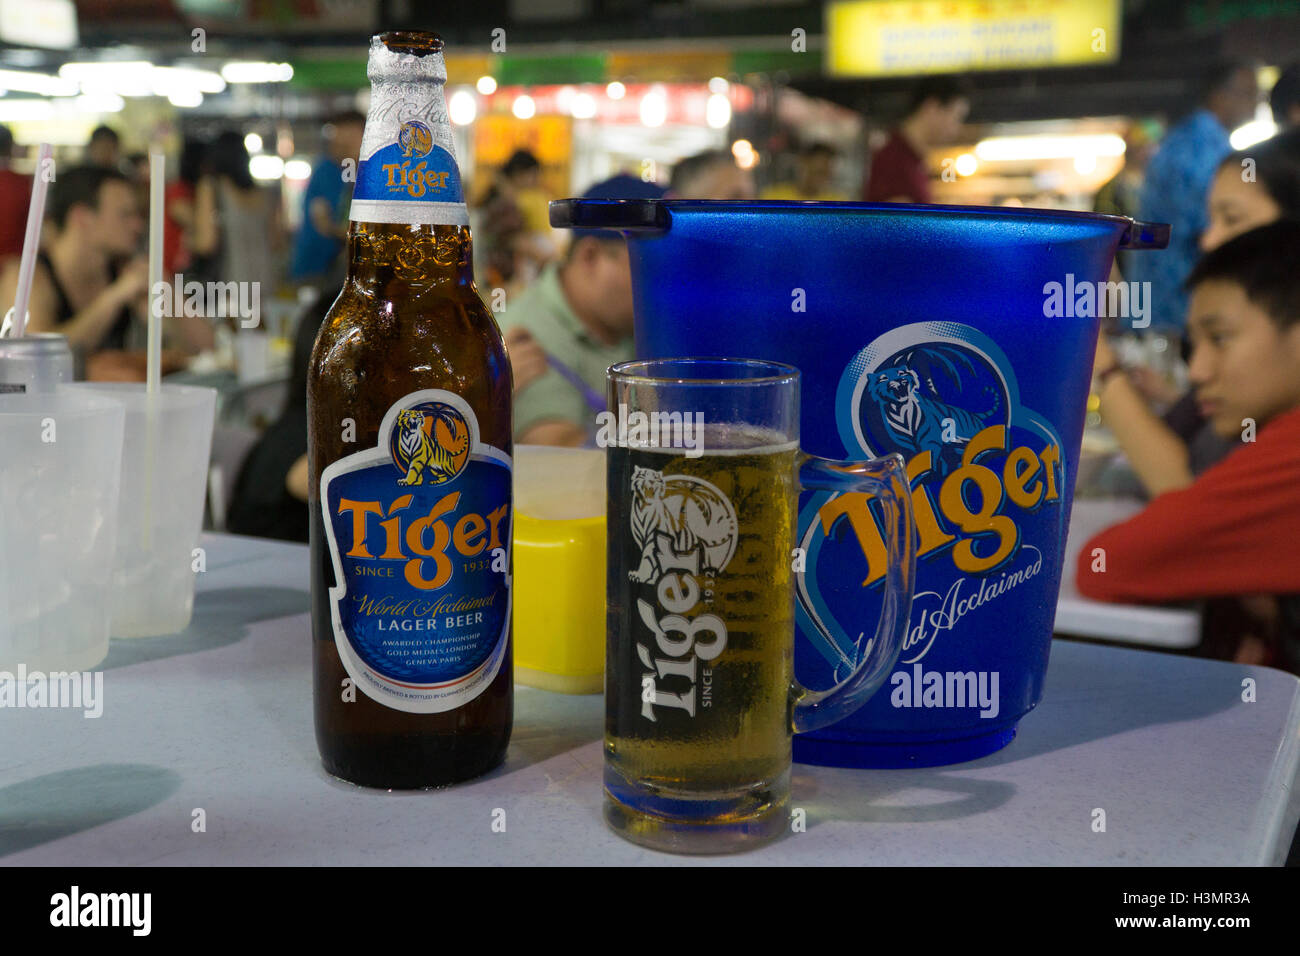 A bottle of Tiger Beer,glass,& bucket on a table within Jalan Alor Street,Kuala Lumpur,Malaysia, Stock Photo